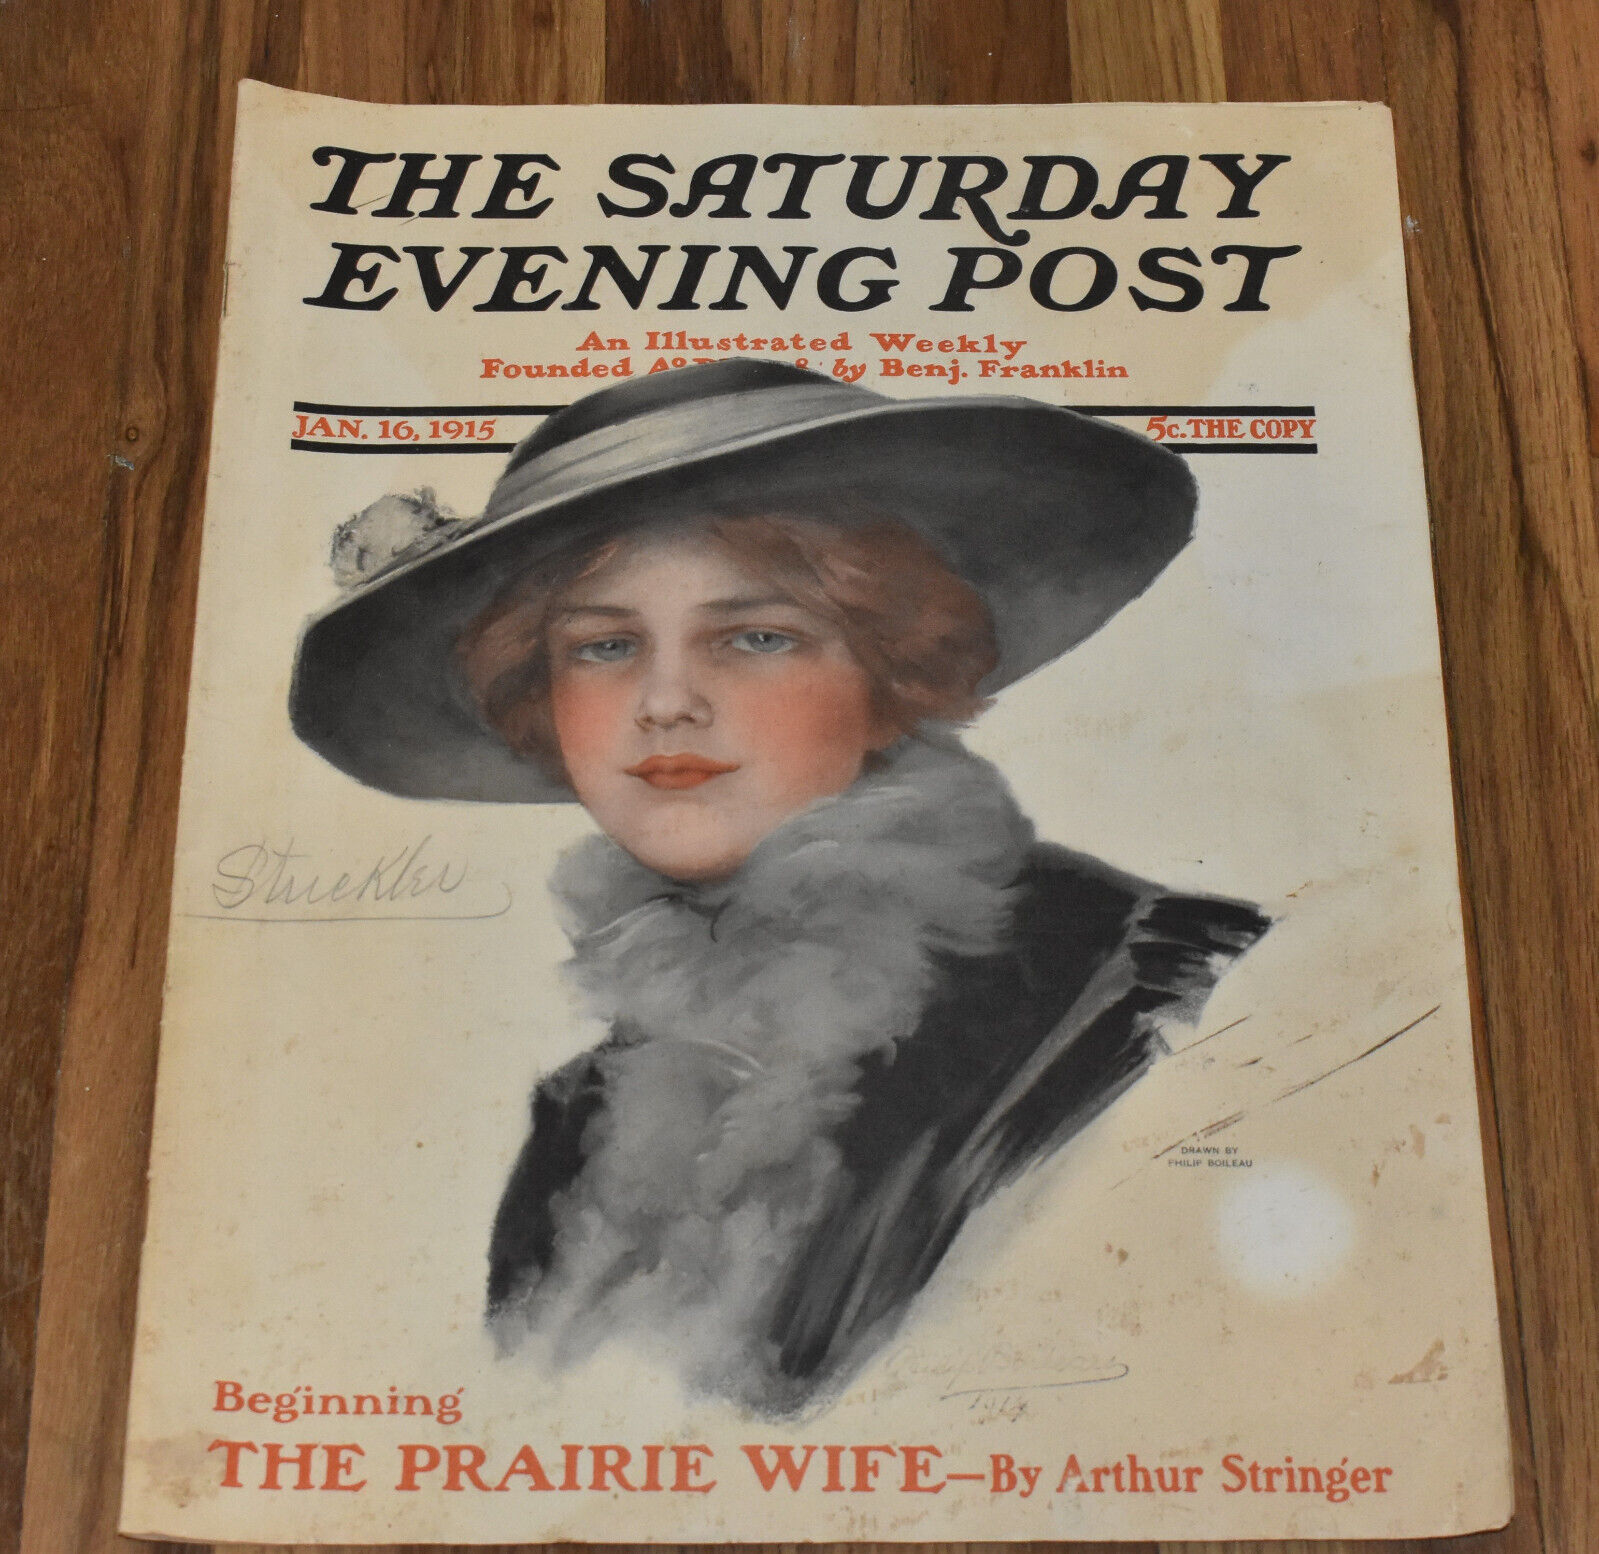 Vintage January 16 1915 Saturday Evening Post Complete Issue